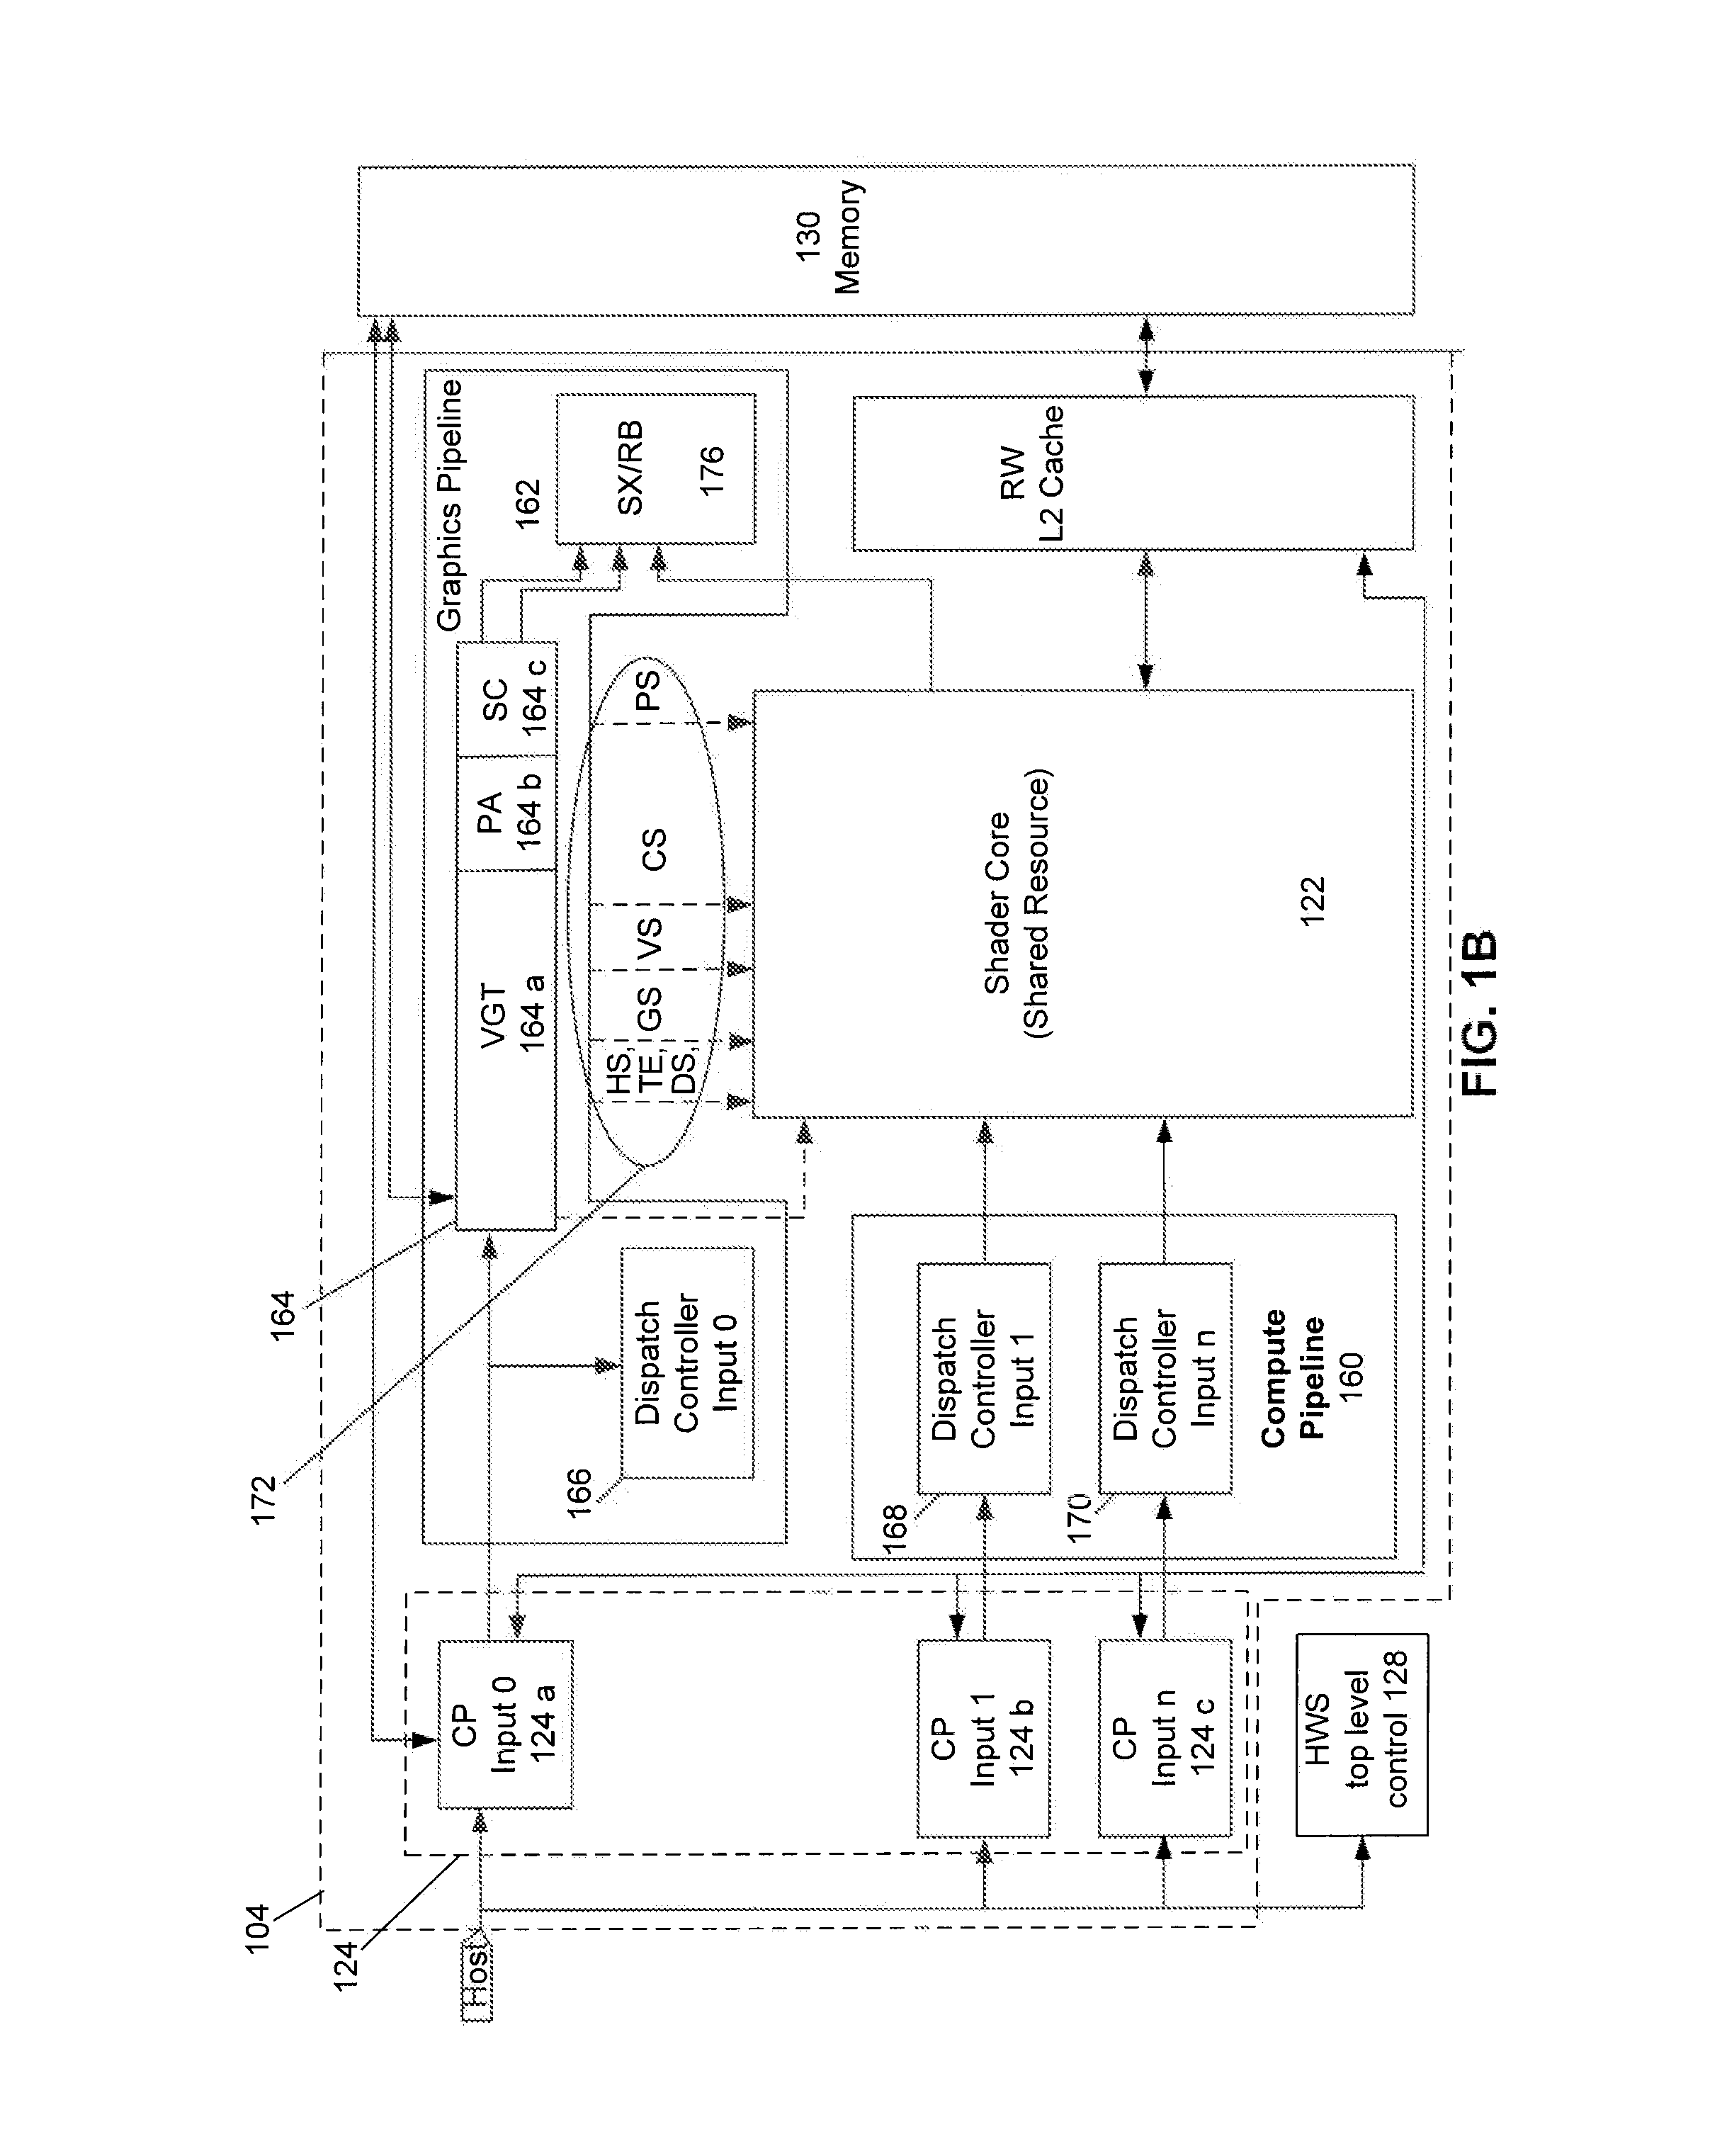 Visibility Ordering in a Memory Model for a Unified Computing System